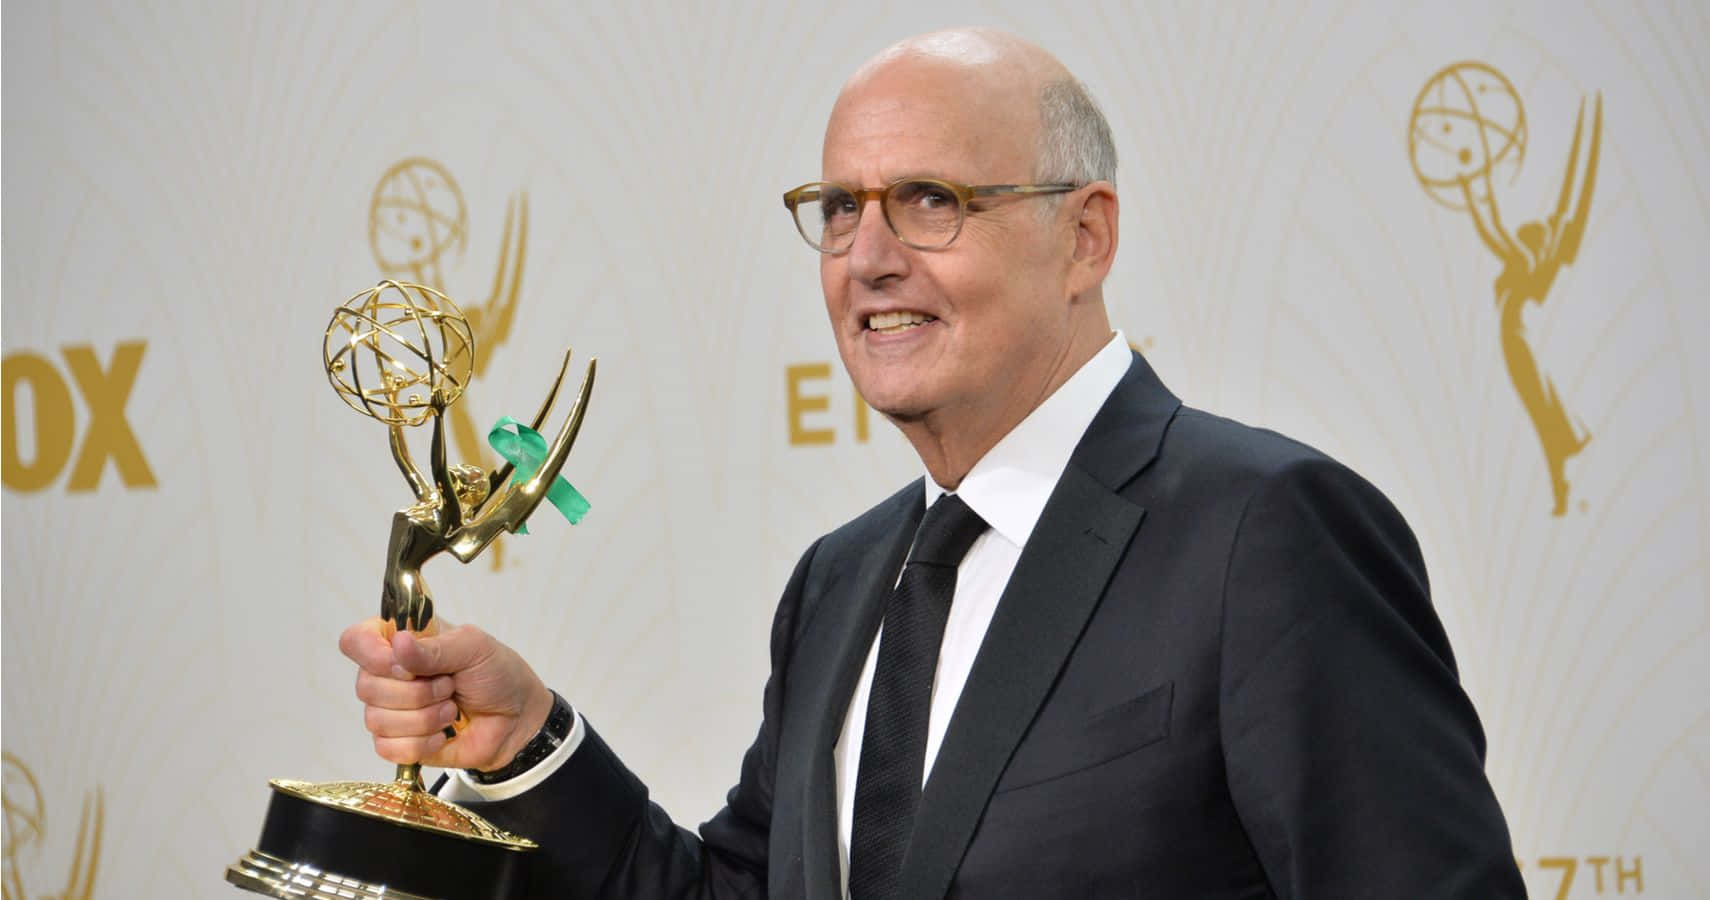 Jeffreytambor Is An American Actor And Comedian. He Is Best Known For His Roles In Television Series Such As 